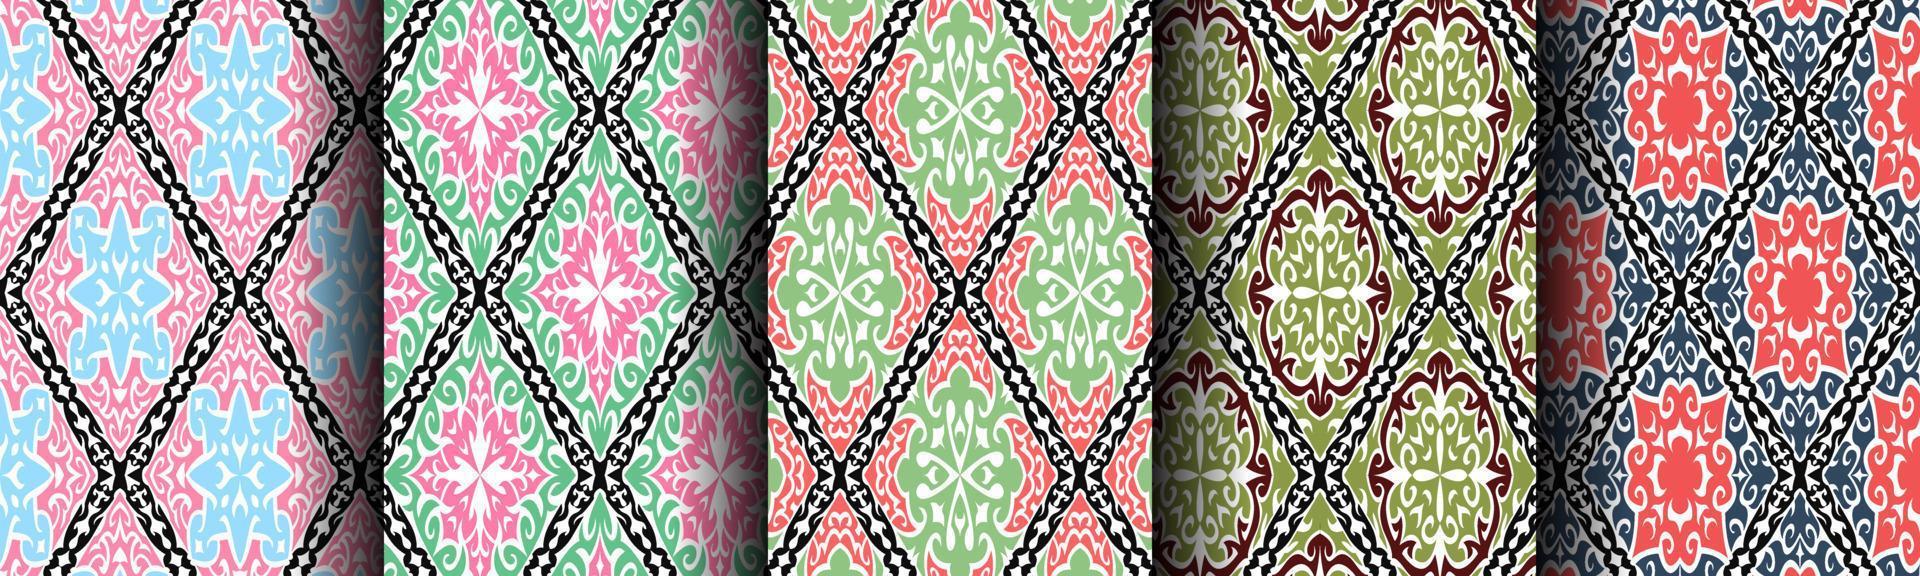 traditional ethnic pattern abstract bundle set vector